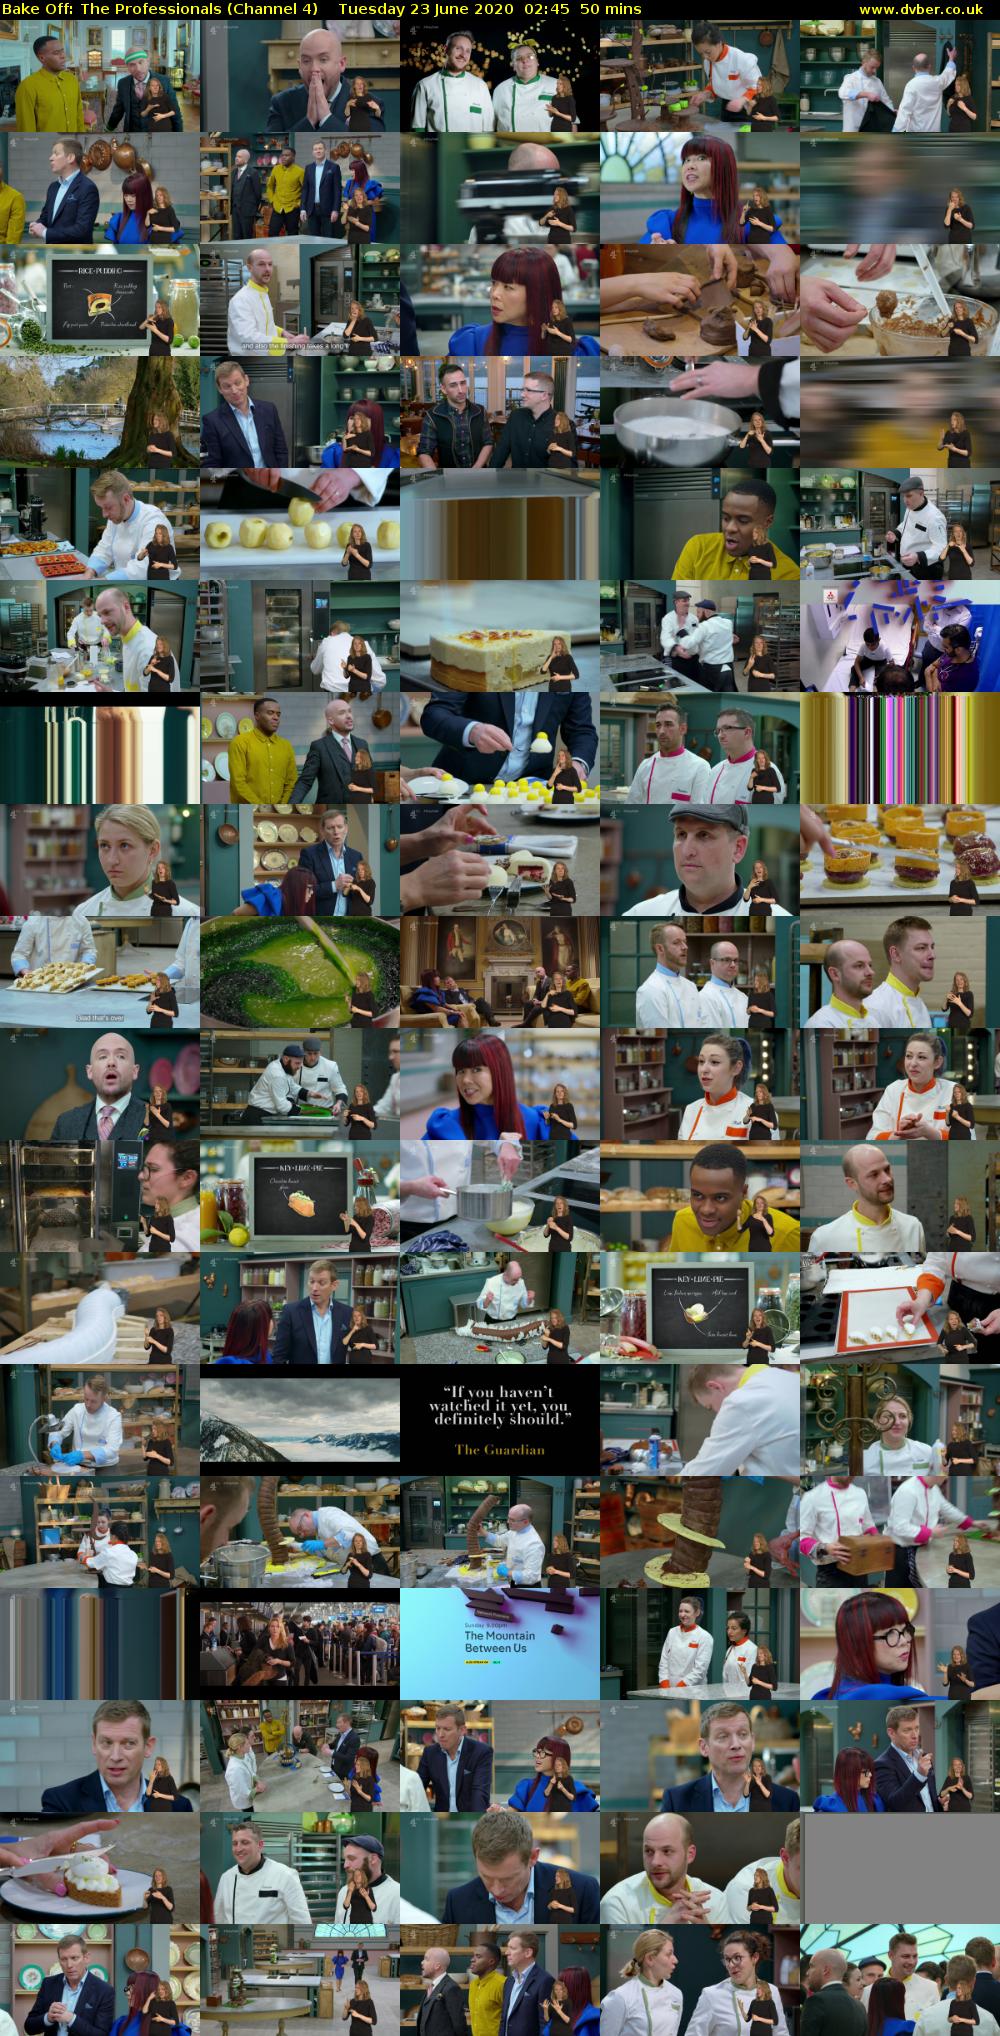 Bake Off: The Professionals (Channel 4) Tuesday 23 June 2020 02:45 - 03:35